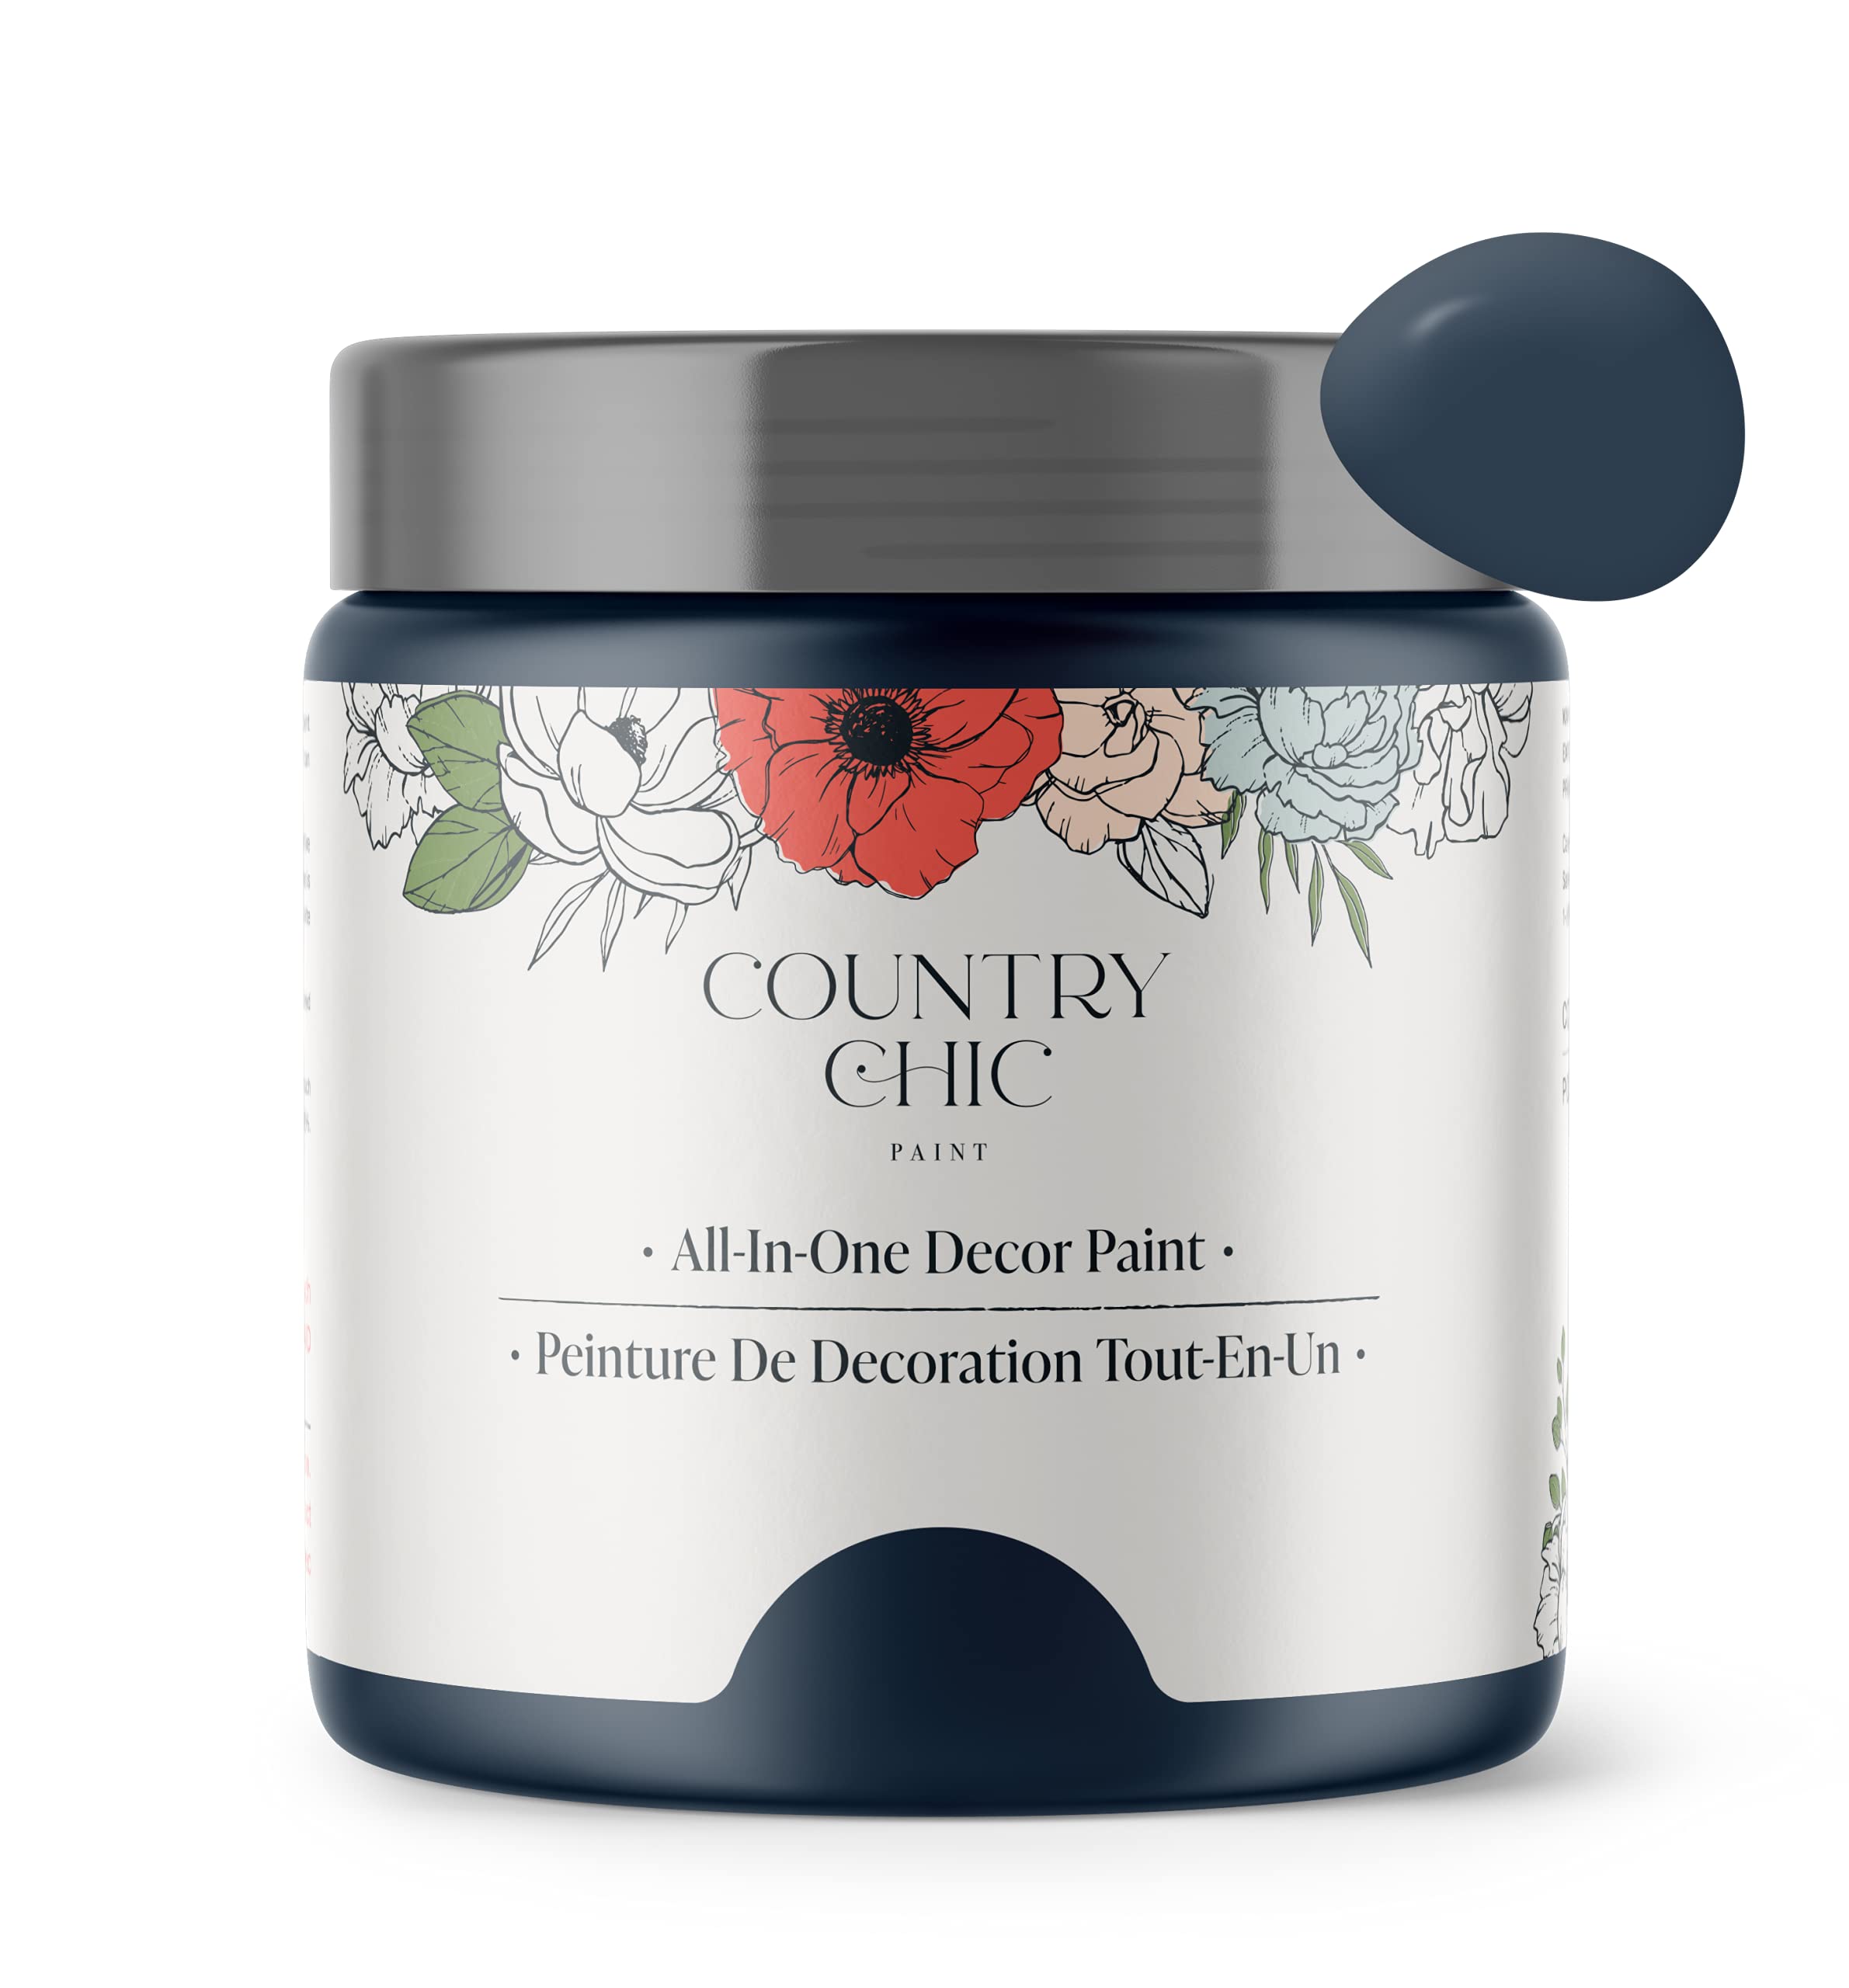 Country Chic Paint chalk Style Paint - for Furniture, Home Decor, crafts - Eco-Friendly - All-in-One - No Wax Needed (Peacoat Navy Blue], Pint (16 